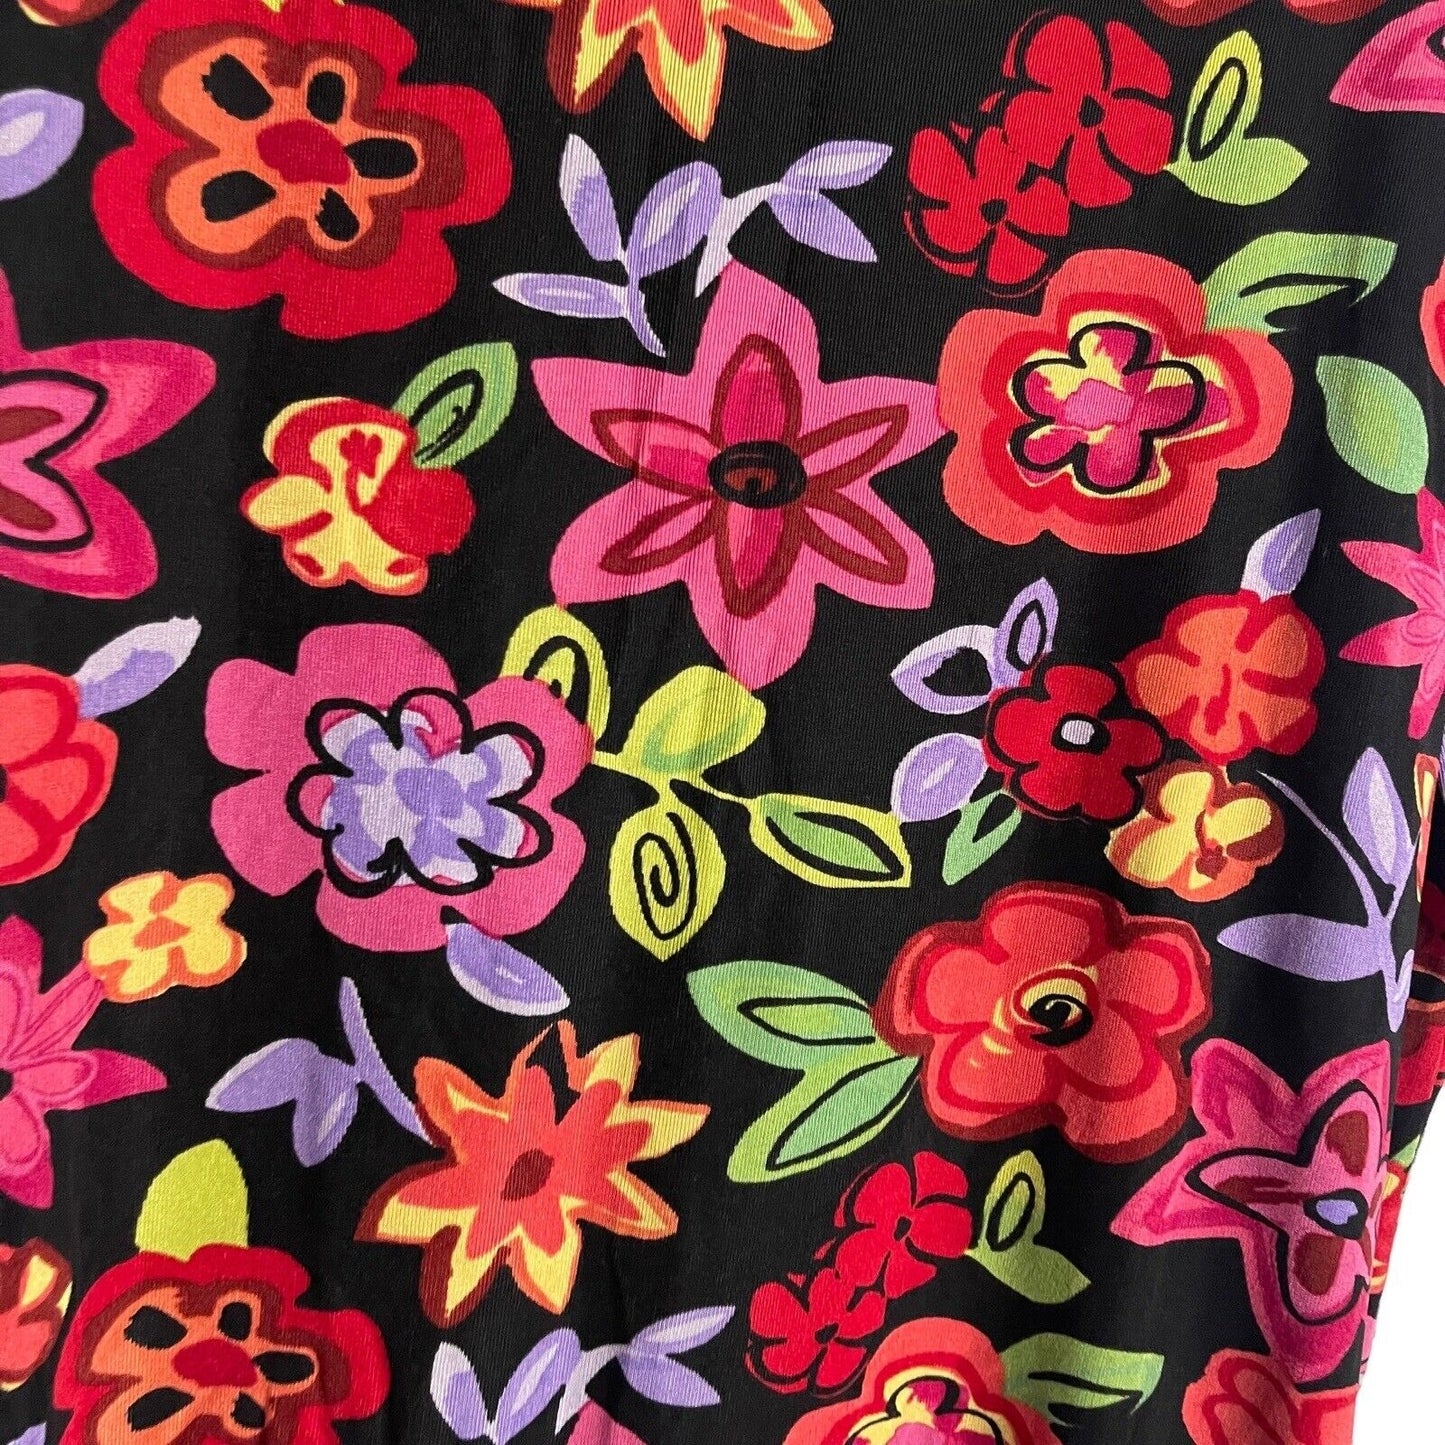 Choices Women's Multicolored Blouse Plus Size 3X Floral Print Stretch Sleeveless